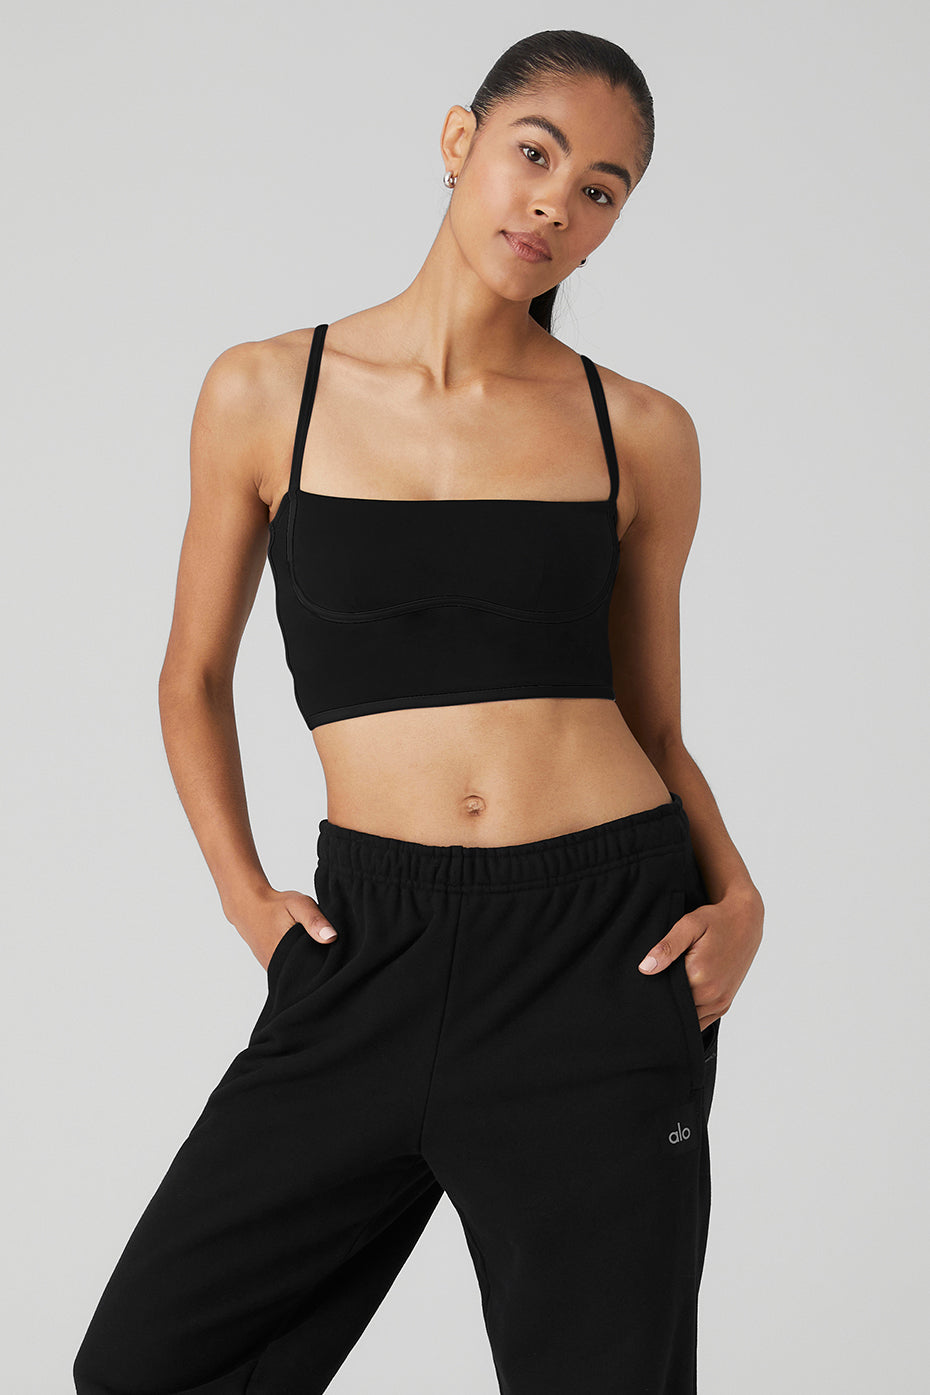 Crop Shop Boutique: 'Obsession' behind top activewear brand  Checkout –  Best Deals, Expert Product Reviews & Buying Guides